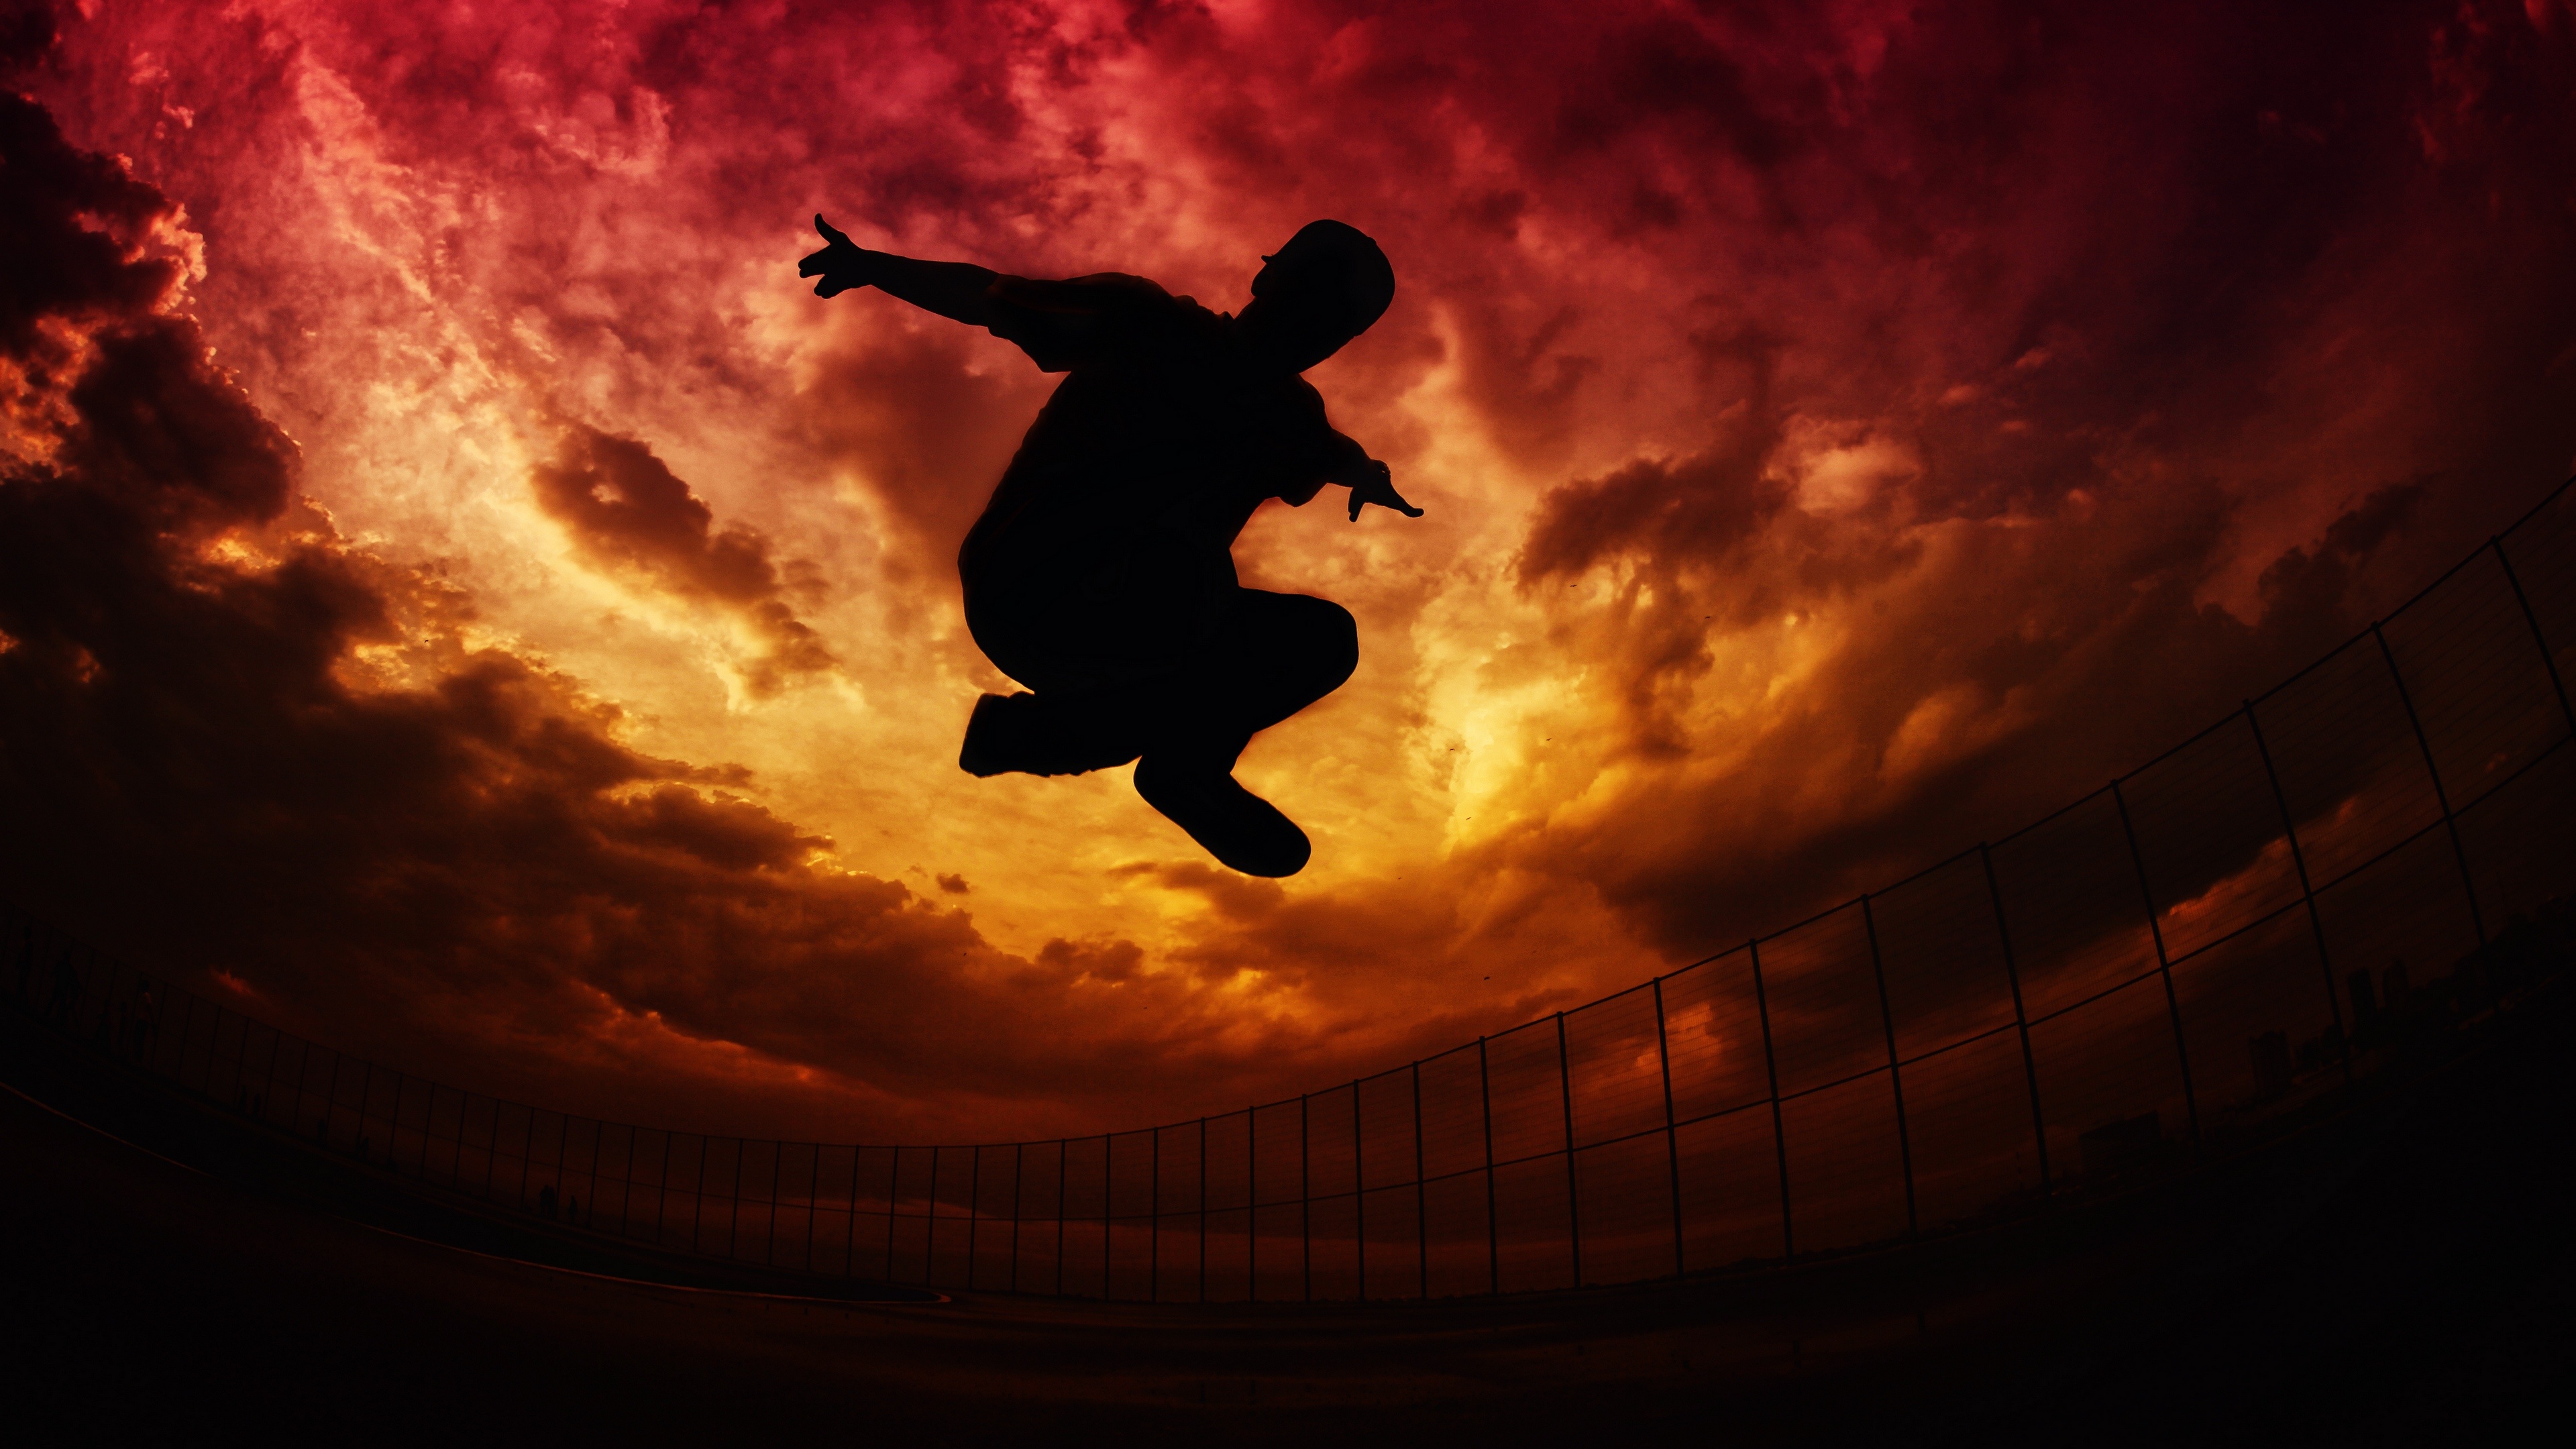 Parkour: Athletic training and sports discipline founded by David Belle. 3840x2160 4K Background.